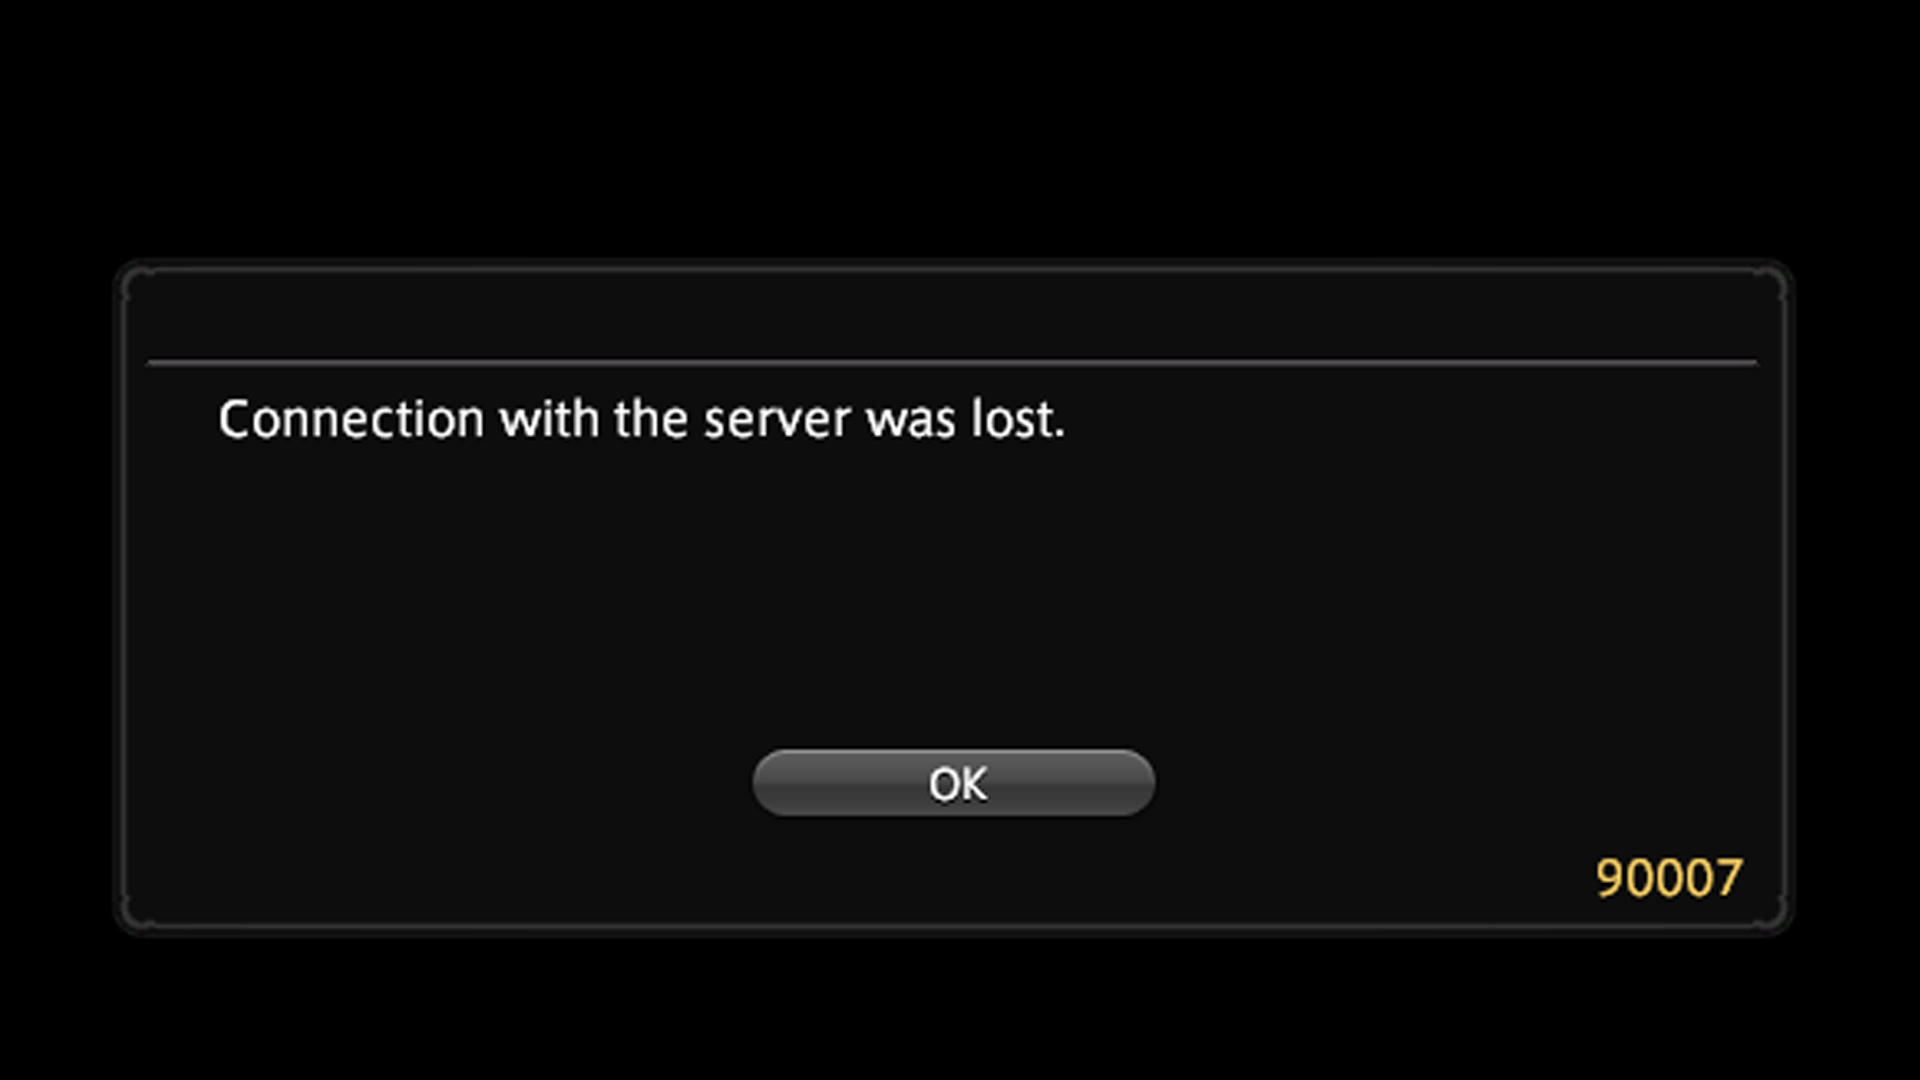 FFXIV Connection with the server was lost